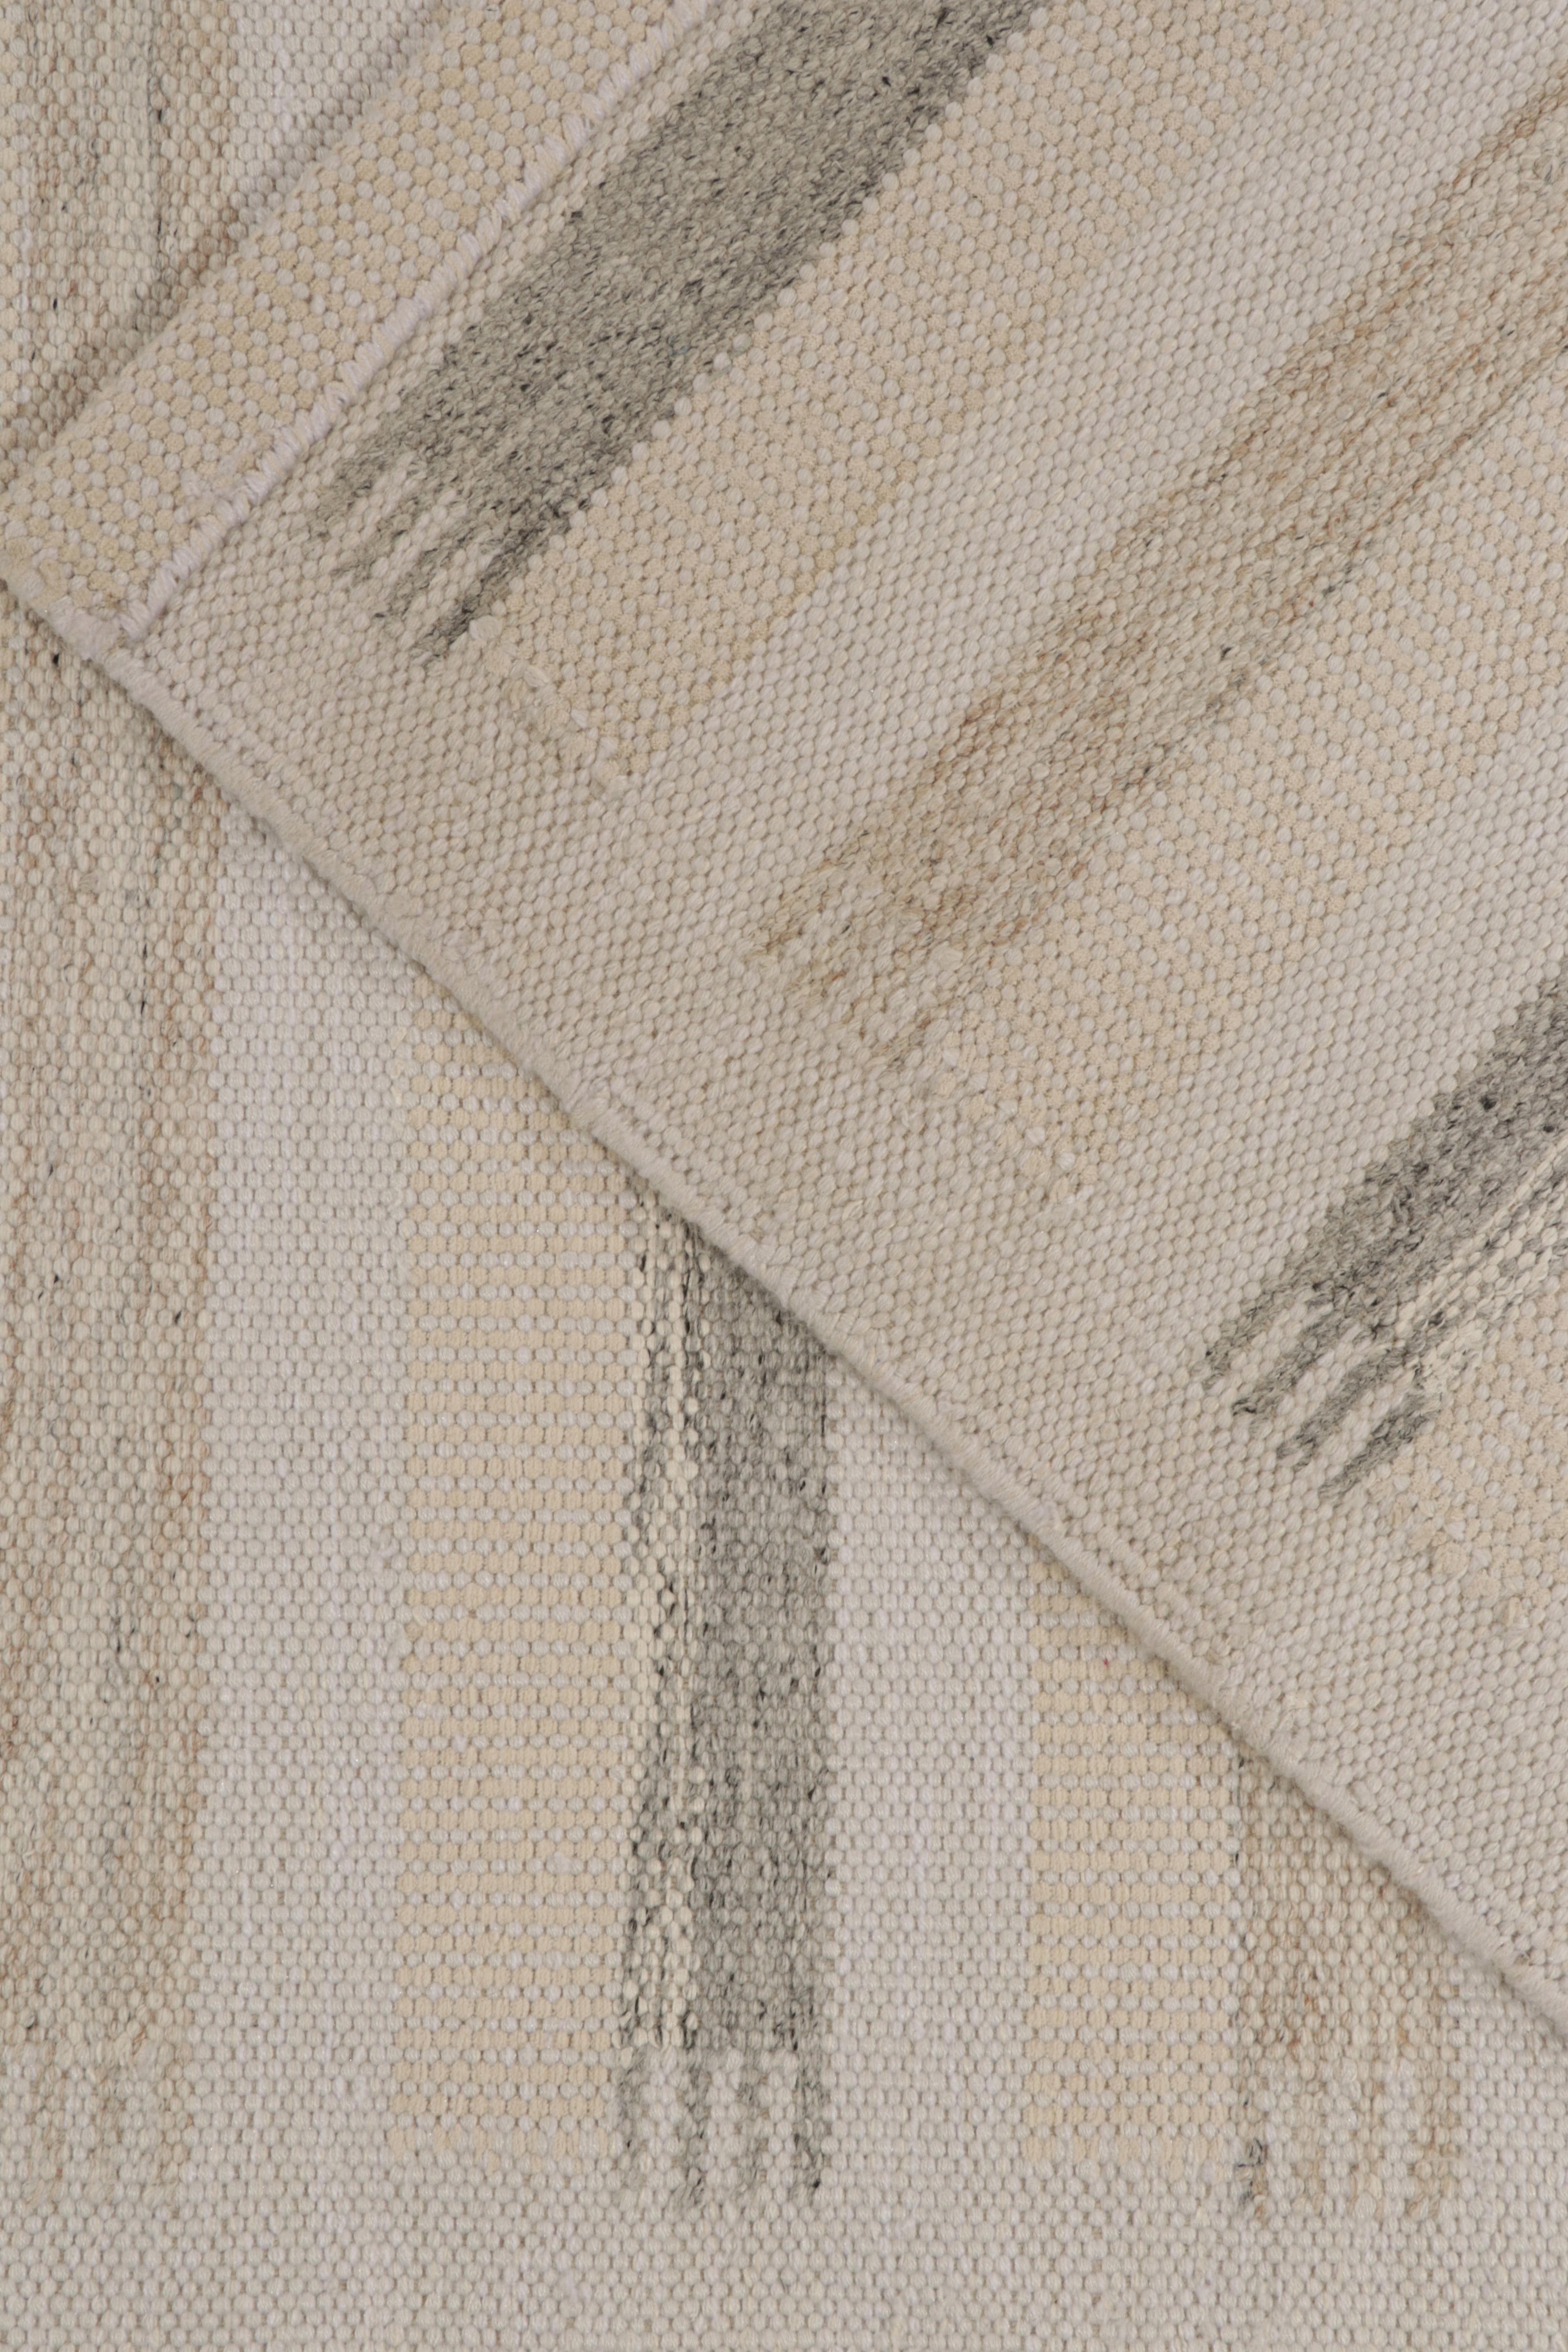 Contemporary Rug & Kilim’s Scandinavian Style Kilim in White, Beige and Gray Stripes For Sale